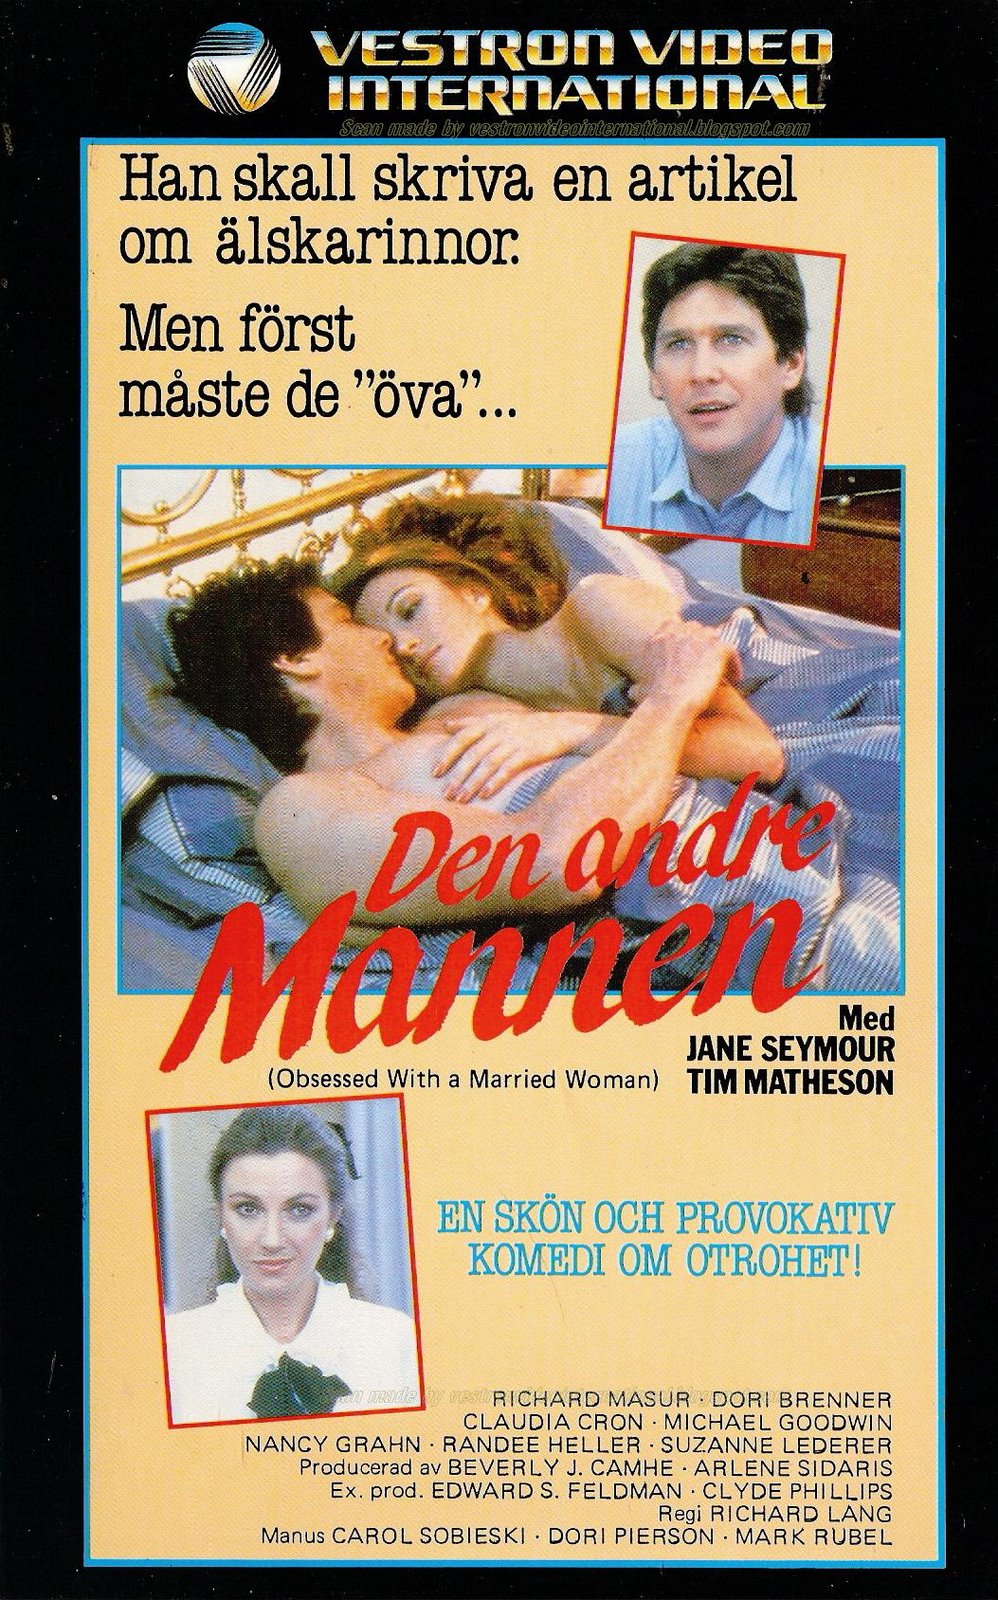 [Obsessed+with+a+married+woman+)+Sweden++-+))FRONT(Scan+made+by+vestronvideointernational.blogspot.com(.JPG]